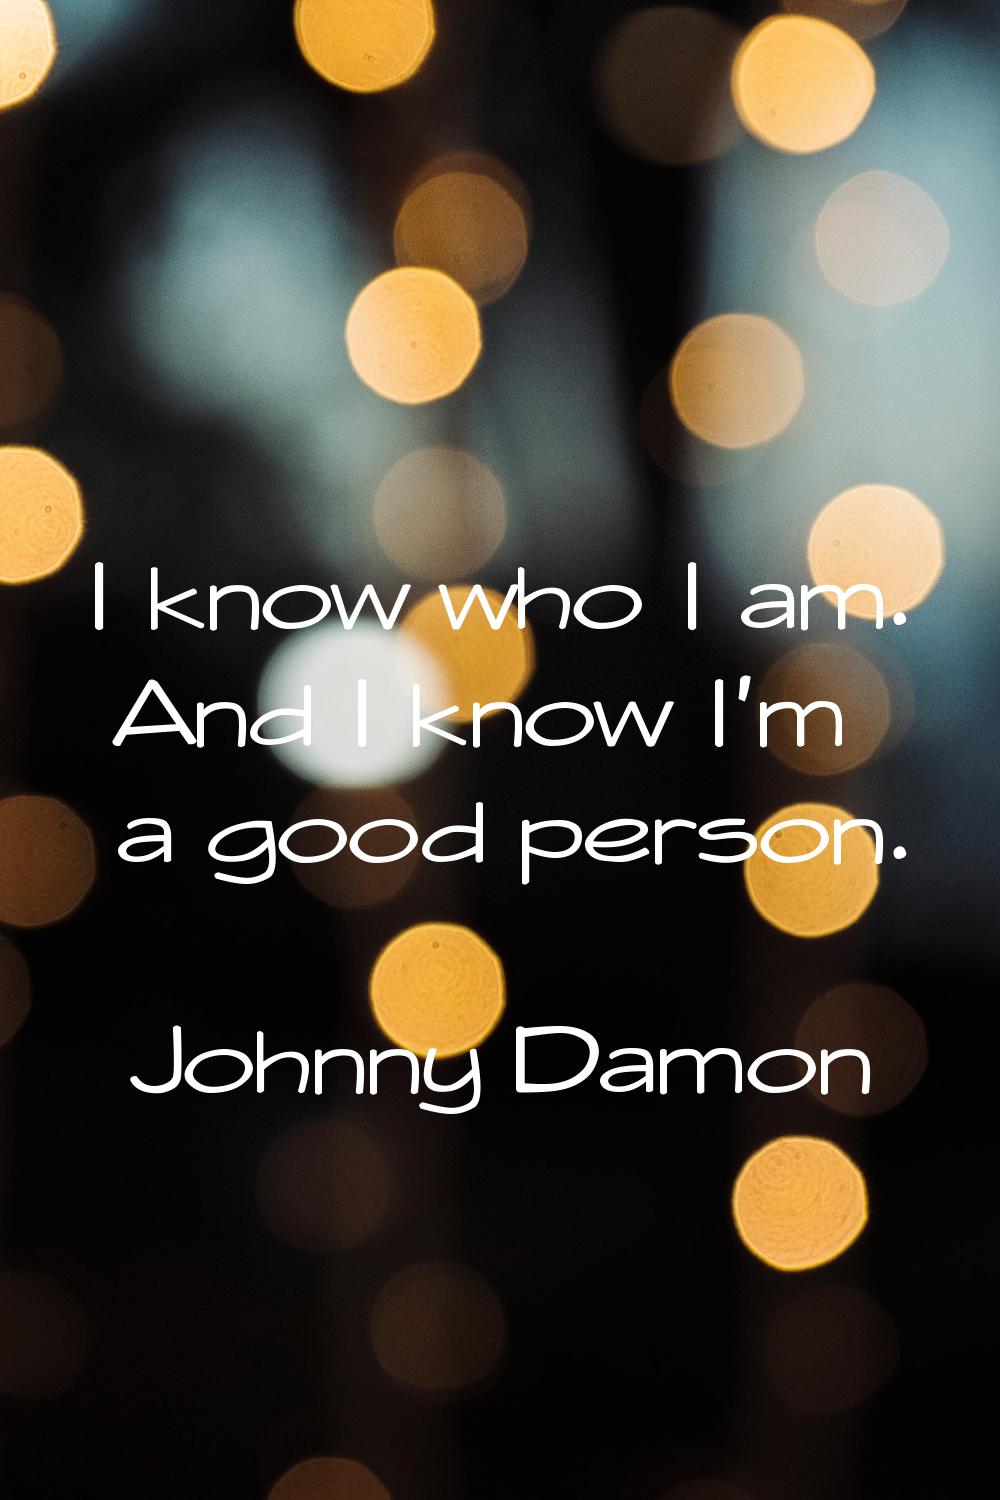 I know who I am. And I know I'm a good person.